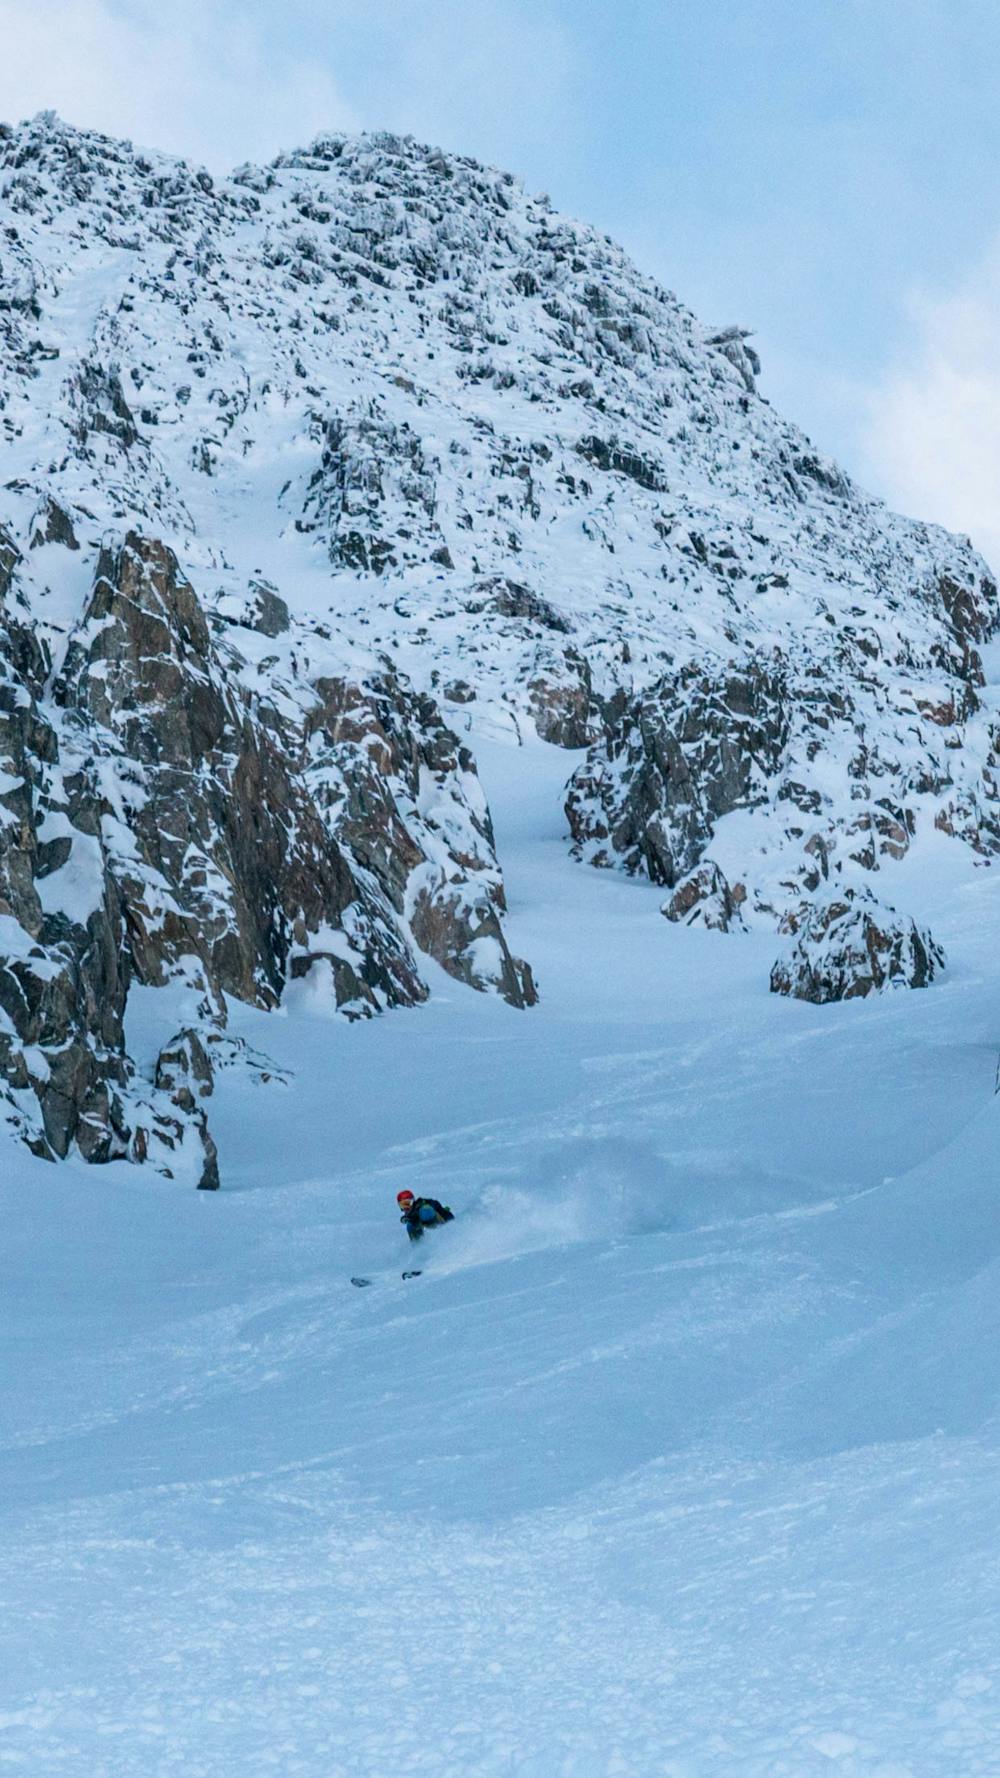 Descent in the couloir